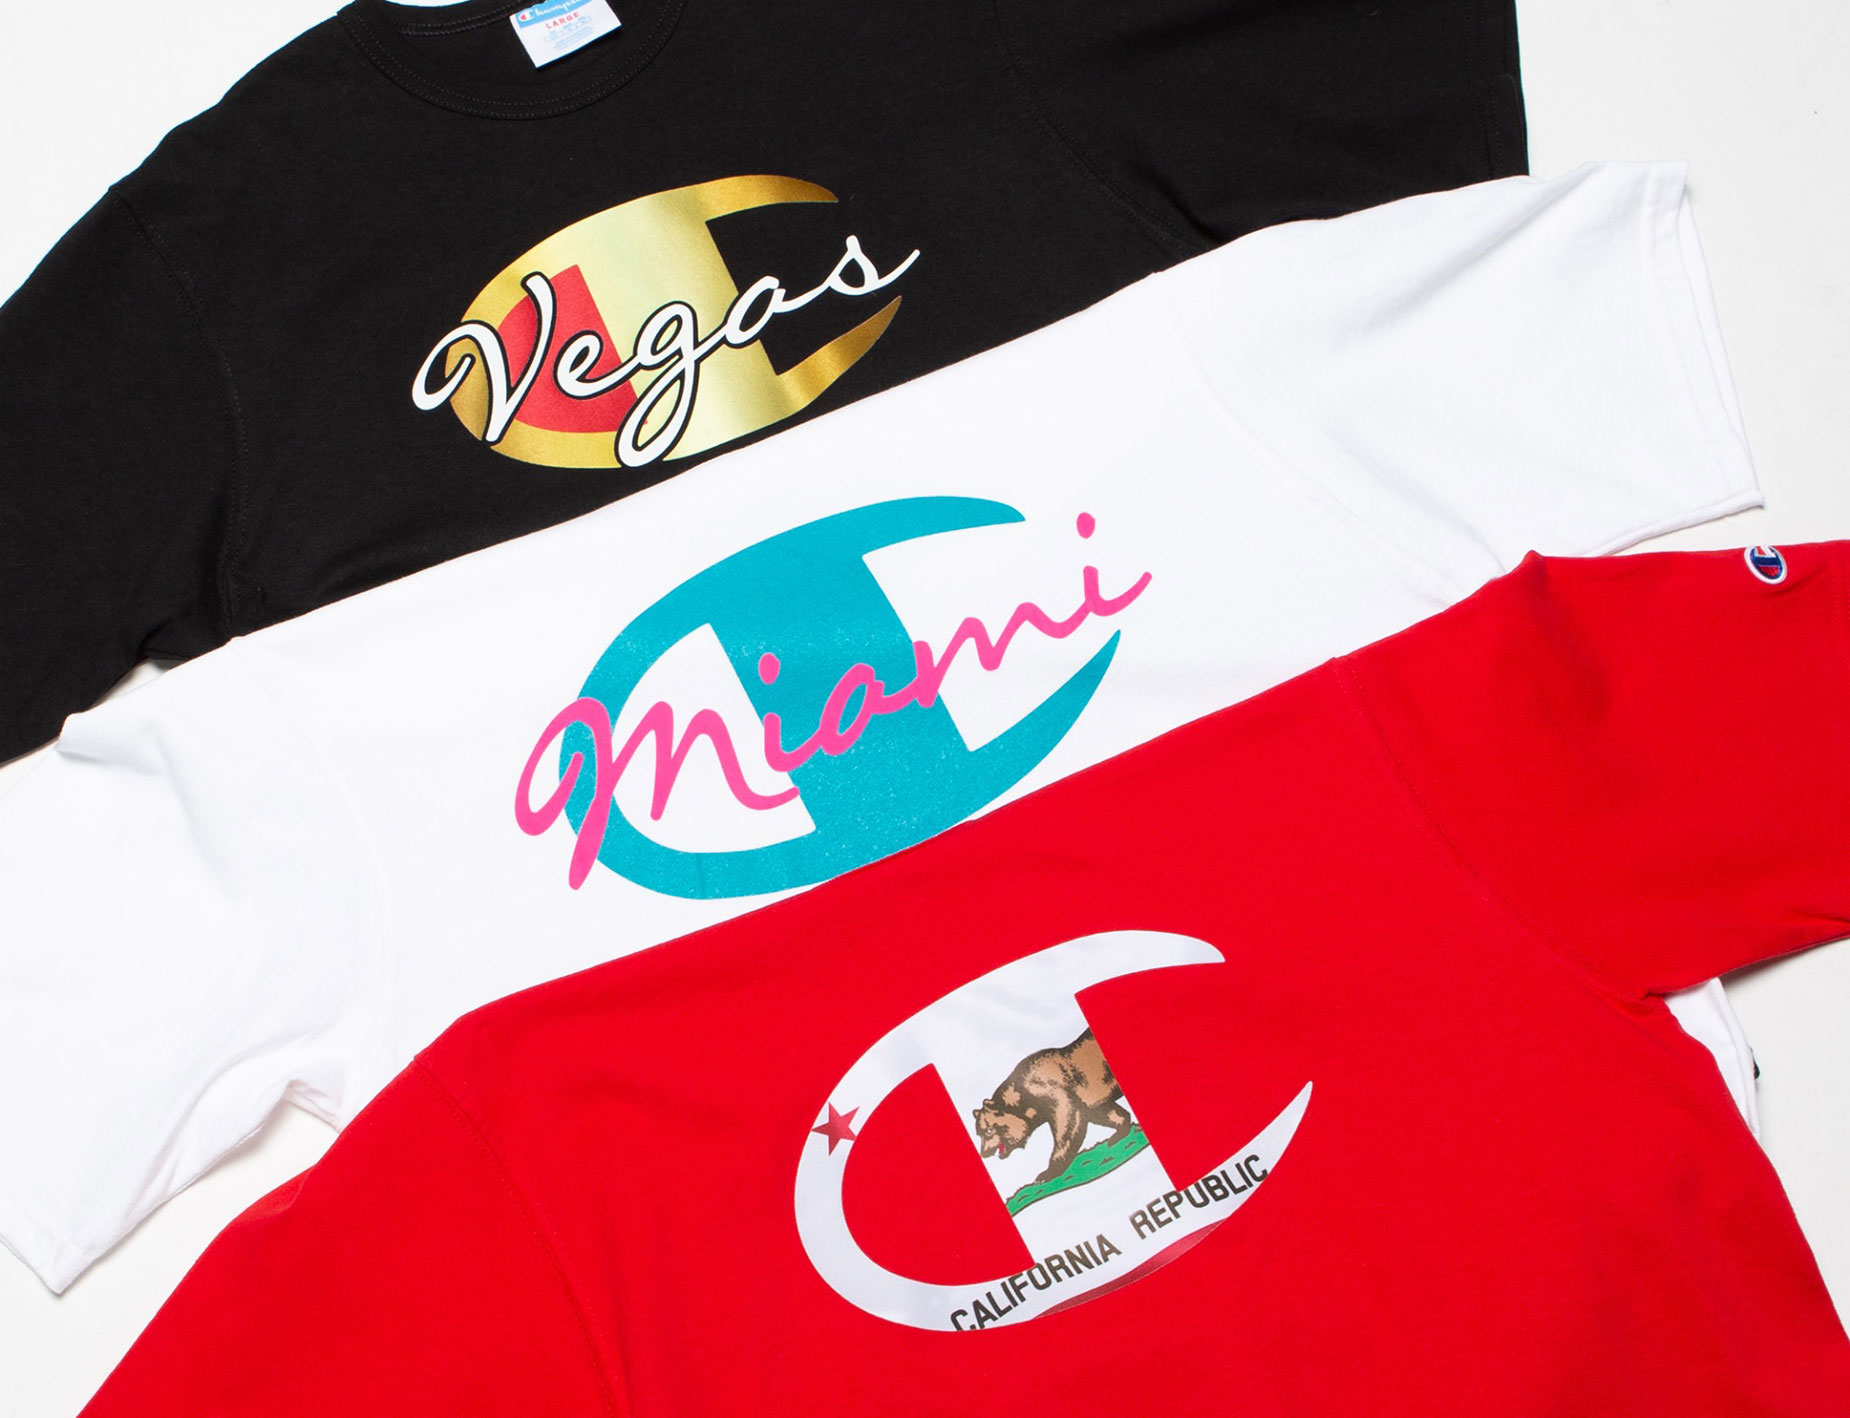 champion country tees